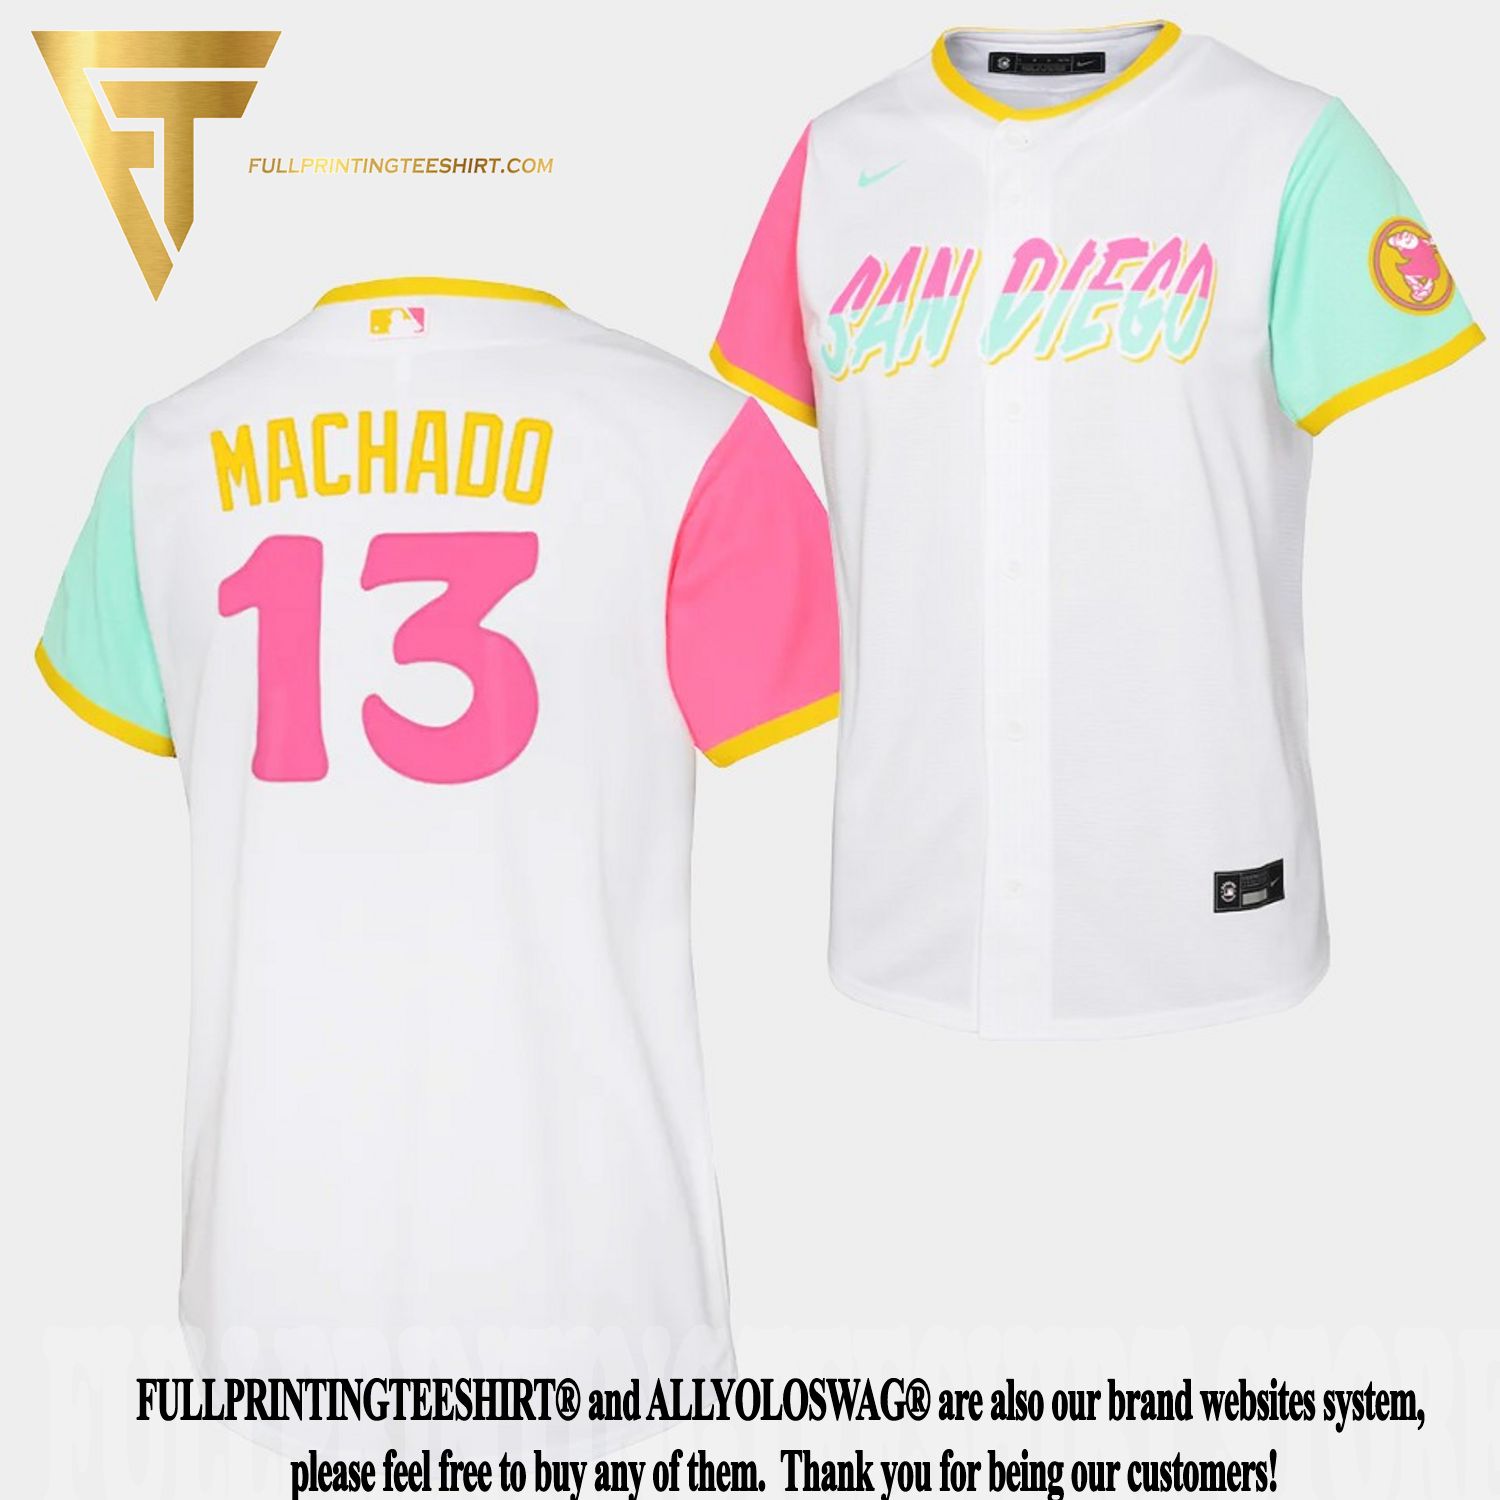 padres youth city connect jersey